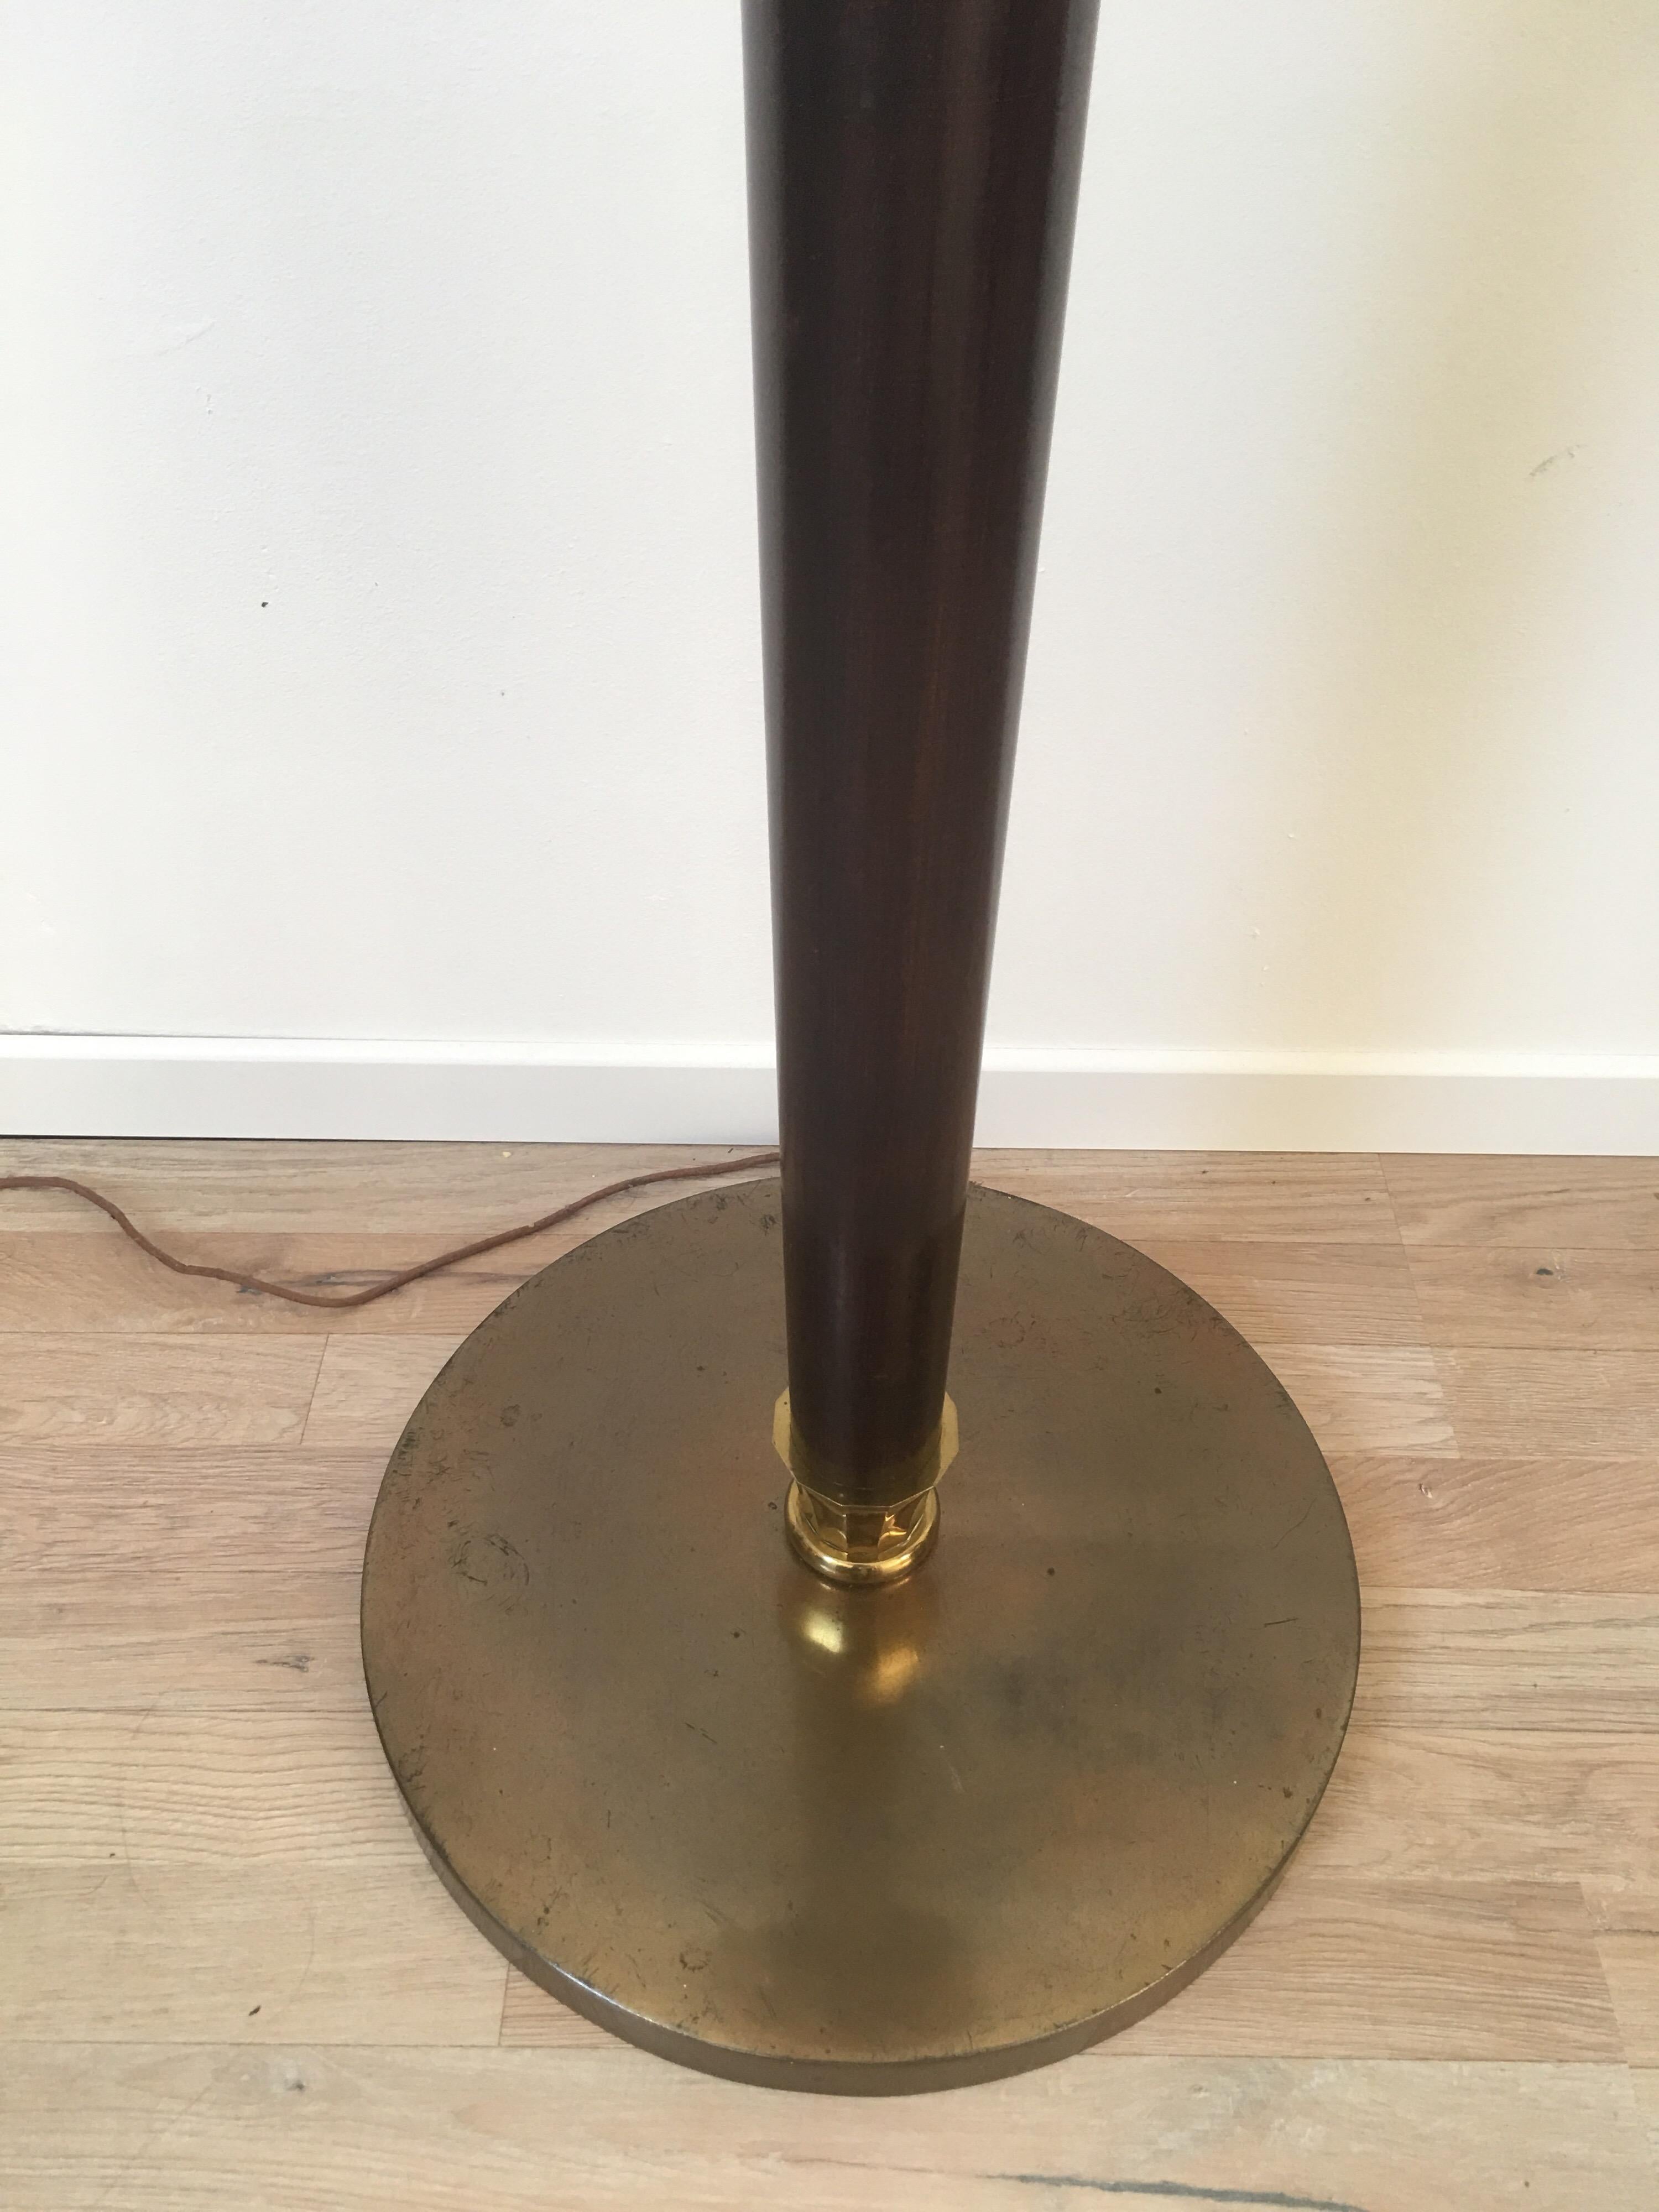 Genet et Michon Art Deco Floor Lamp in Wood and Brass, French, 1930s For Sale 4